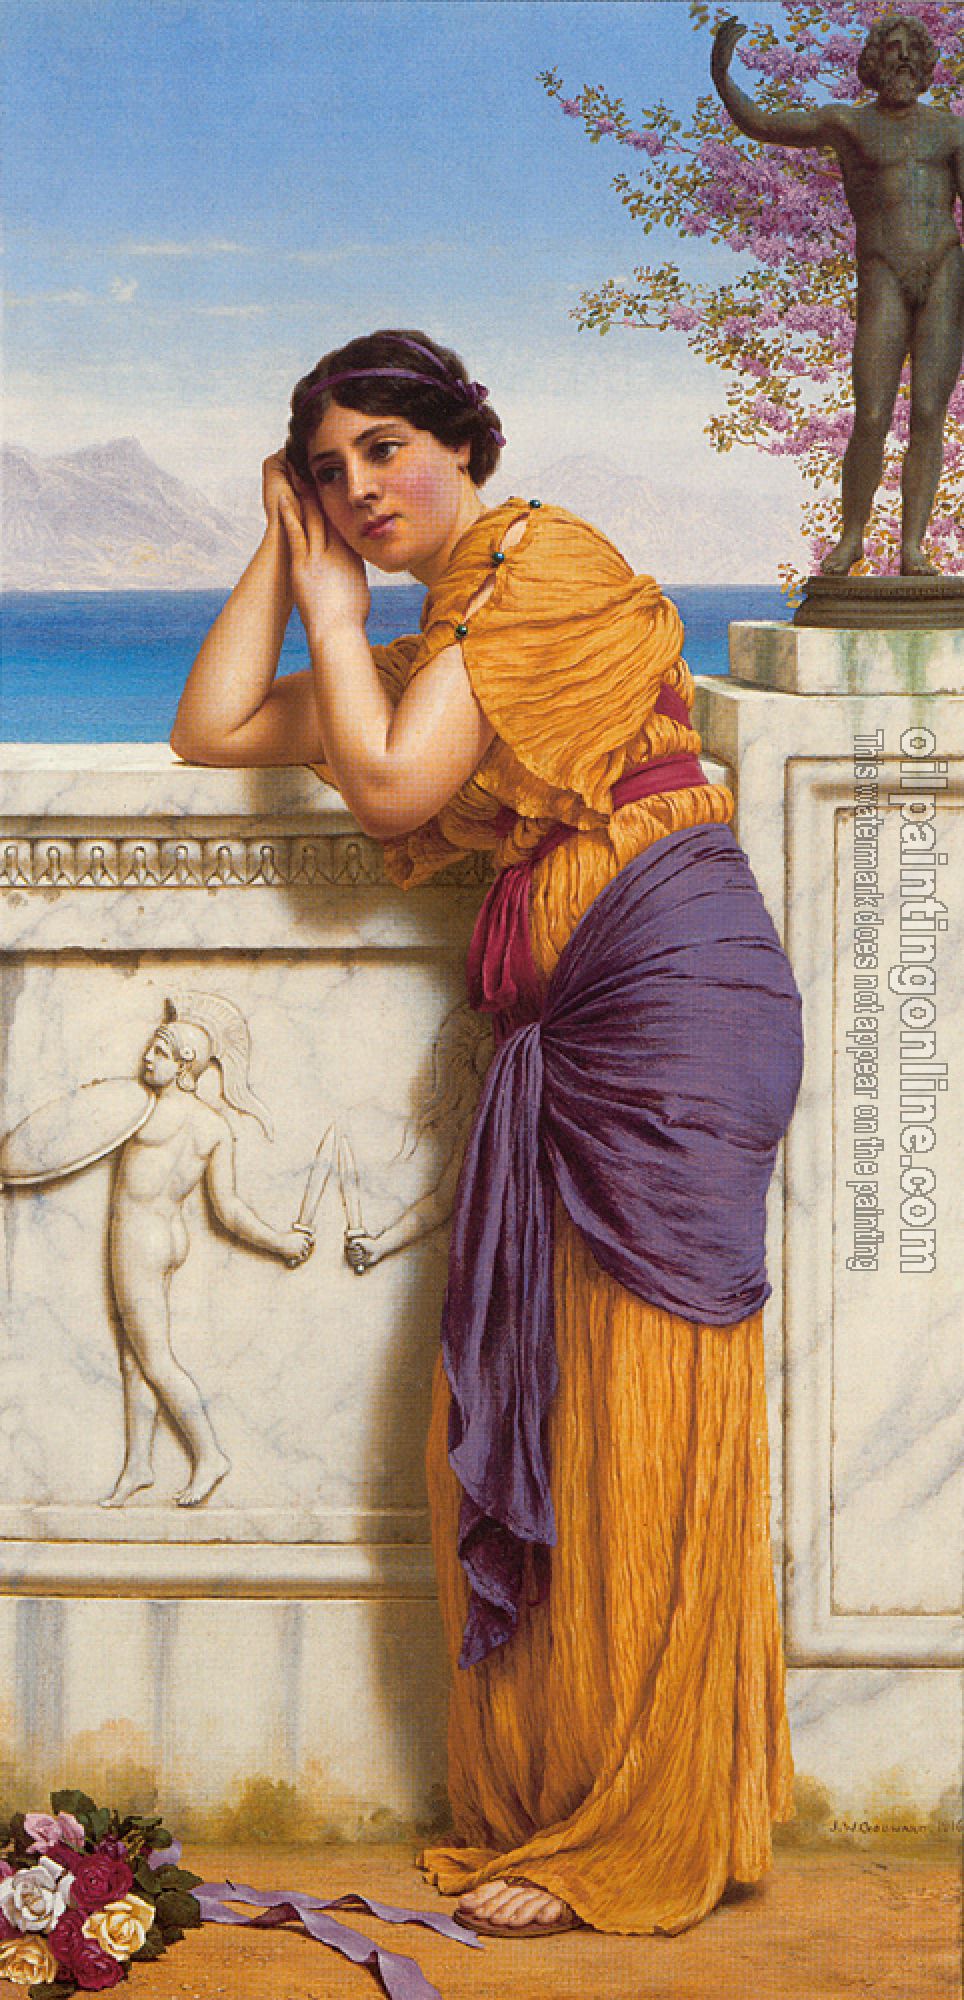 Godward, John William - Rich Gifts Wax Poor When Lovers Prove Unkind